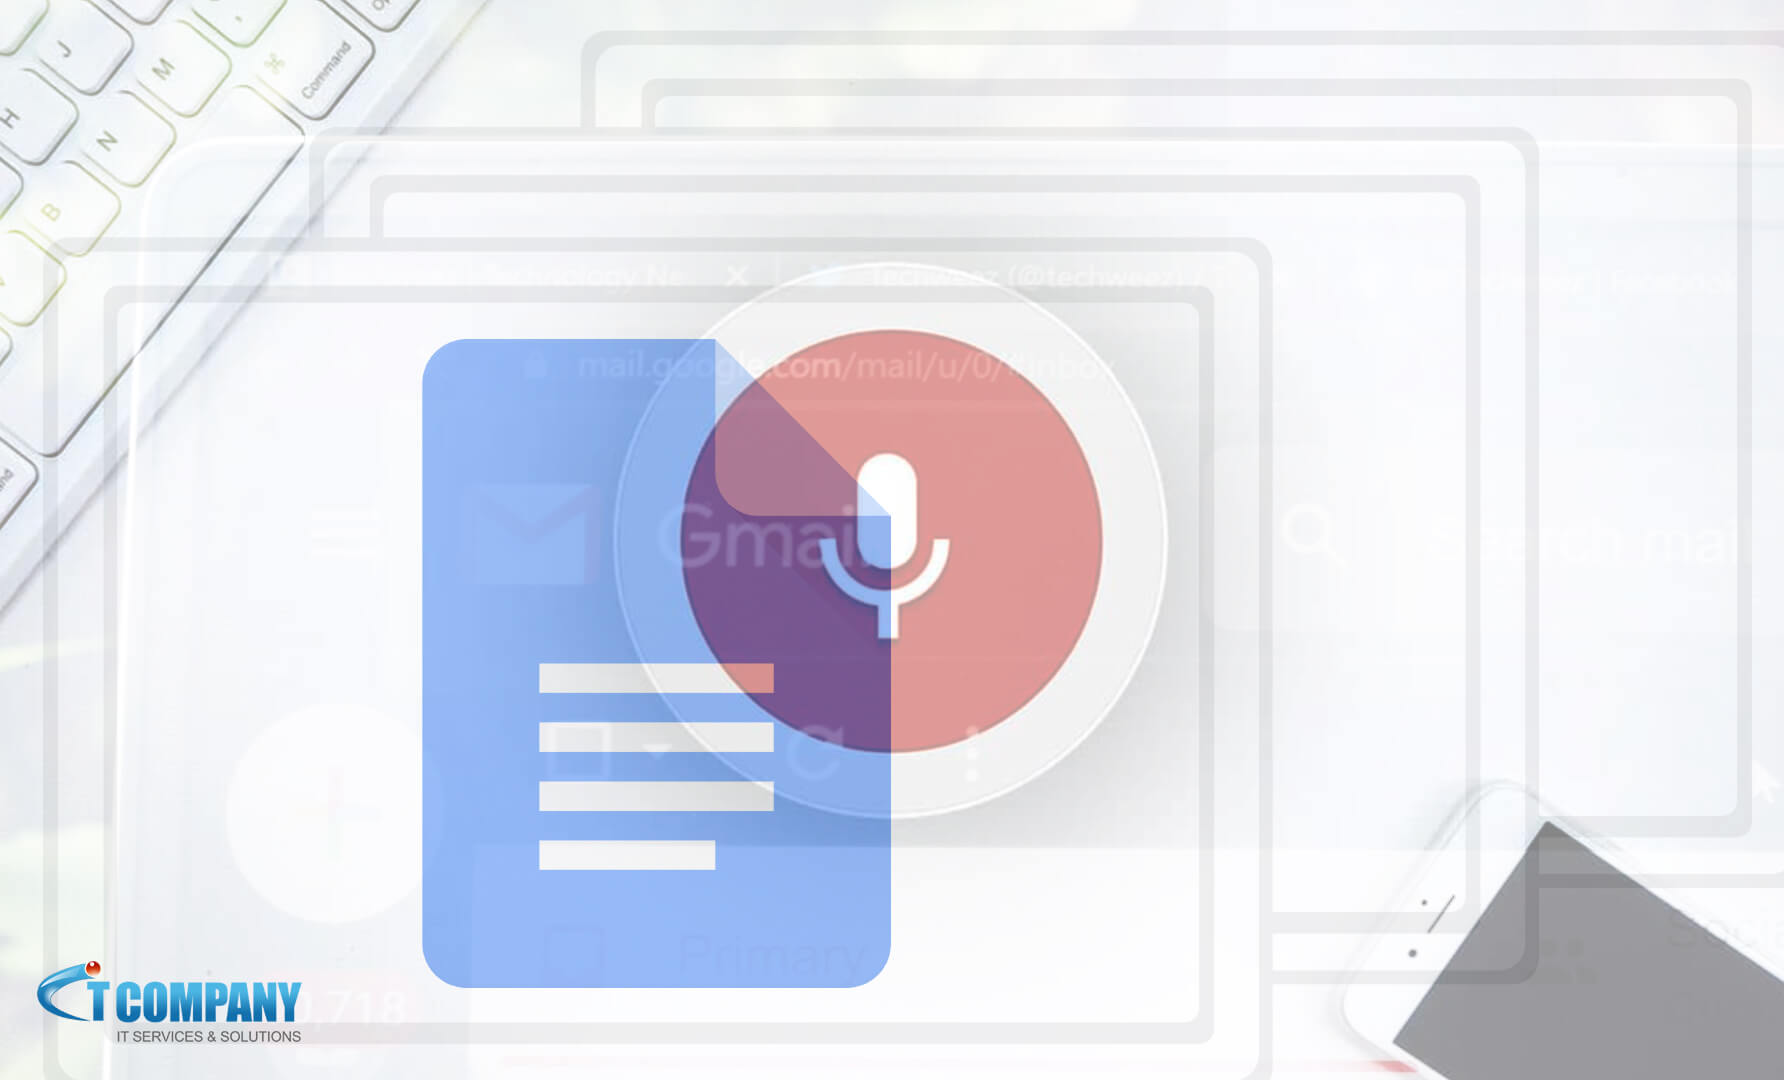 Docs: A Google upgrade will make voice typing quite useful